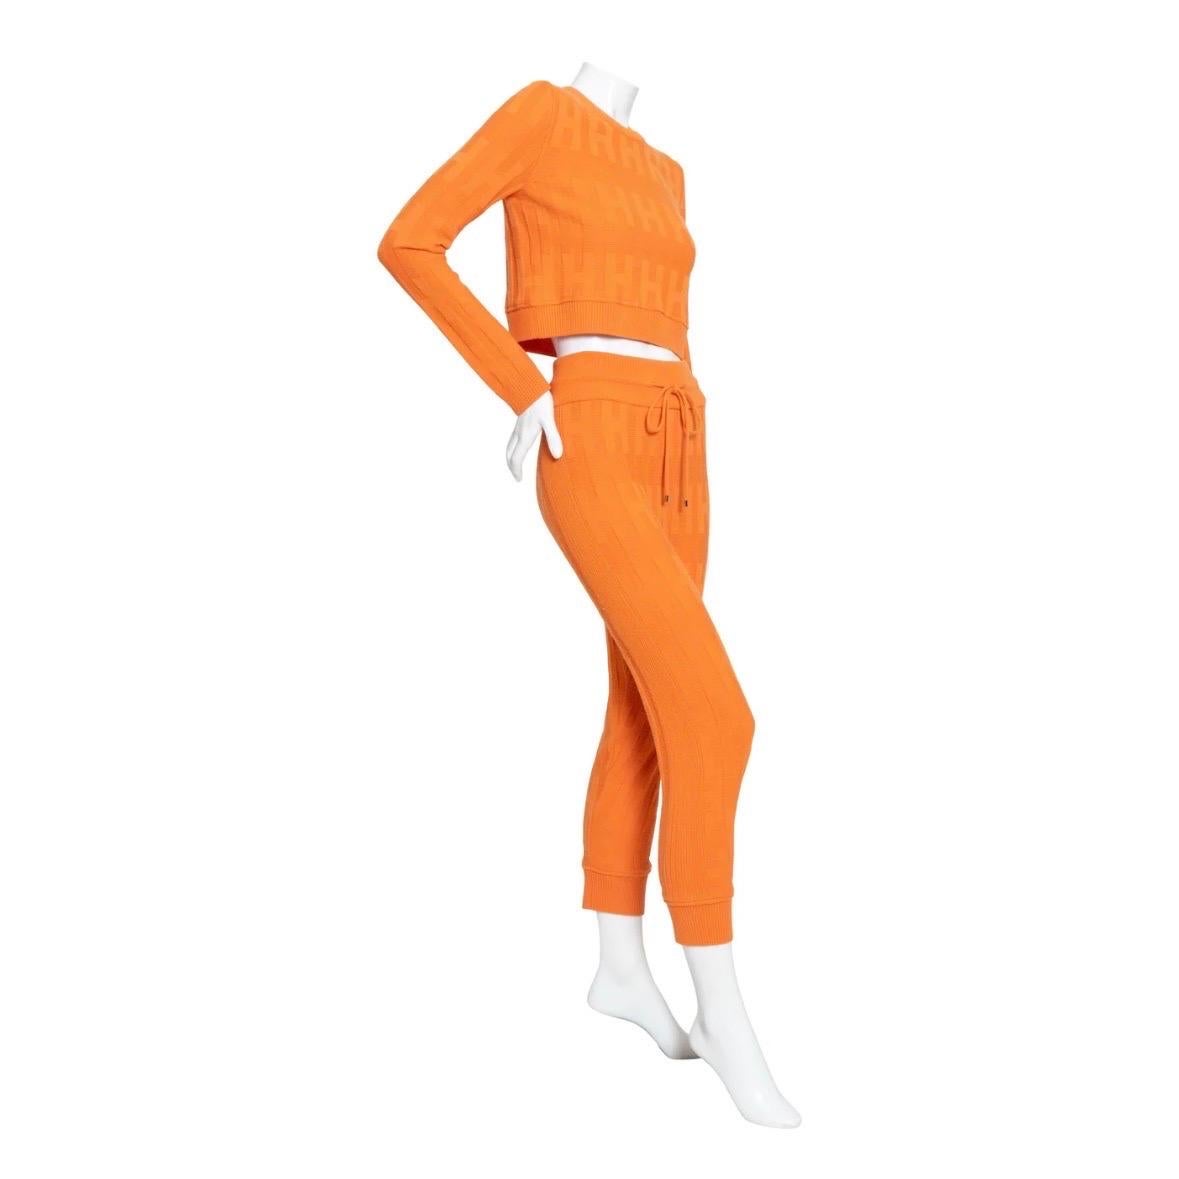 “H” Orange Terre Battue 2-piece Set by Hermès
Set includes “H” long-sleeve sweater and jogging pants 
Textured H-pattern knit
Made in Italy
Fabric: 100% virgin wool
Top:

Crewneck
Rib trimmed
Pull-over
Crop fit
Condition: excellent; minimal signs of